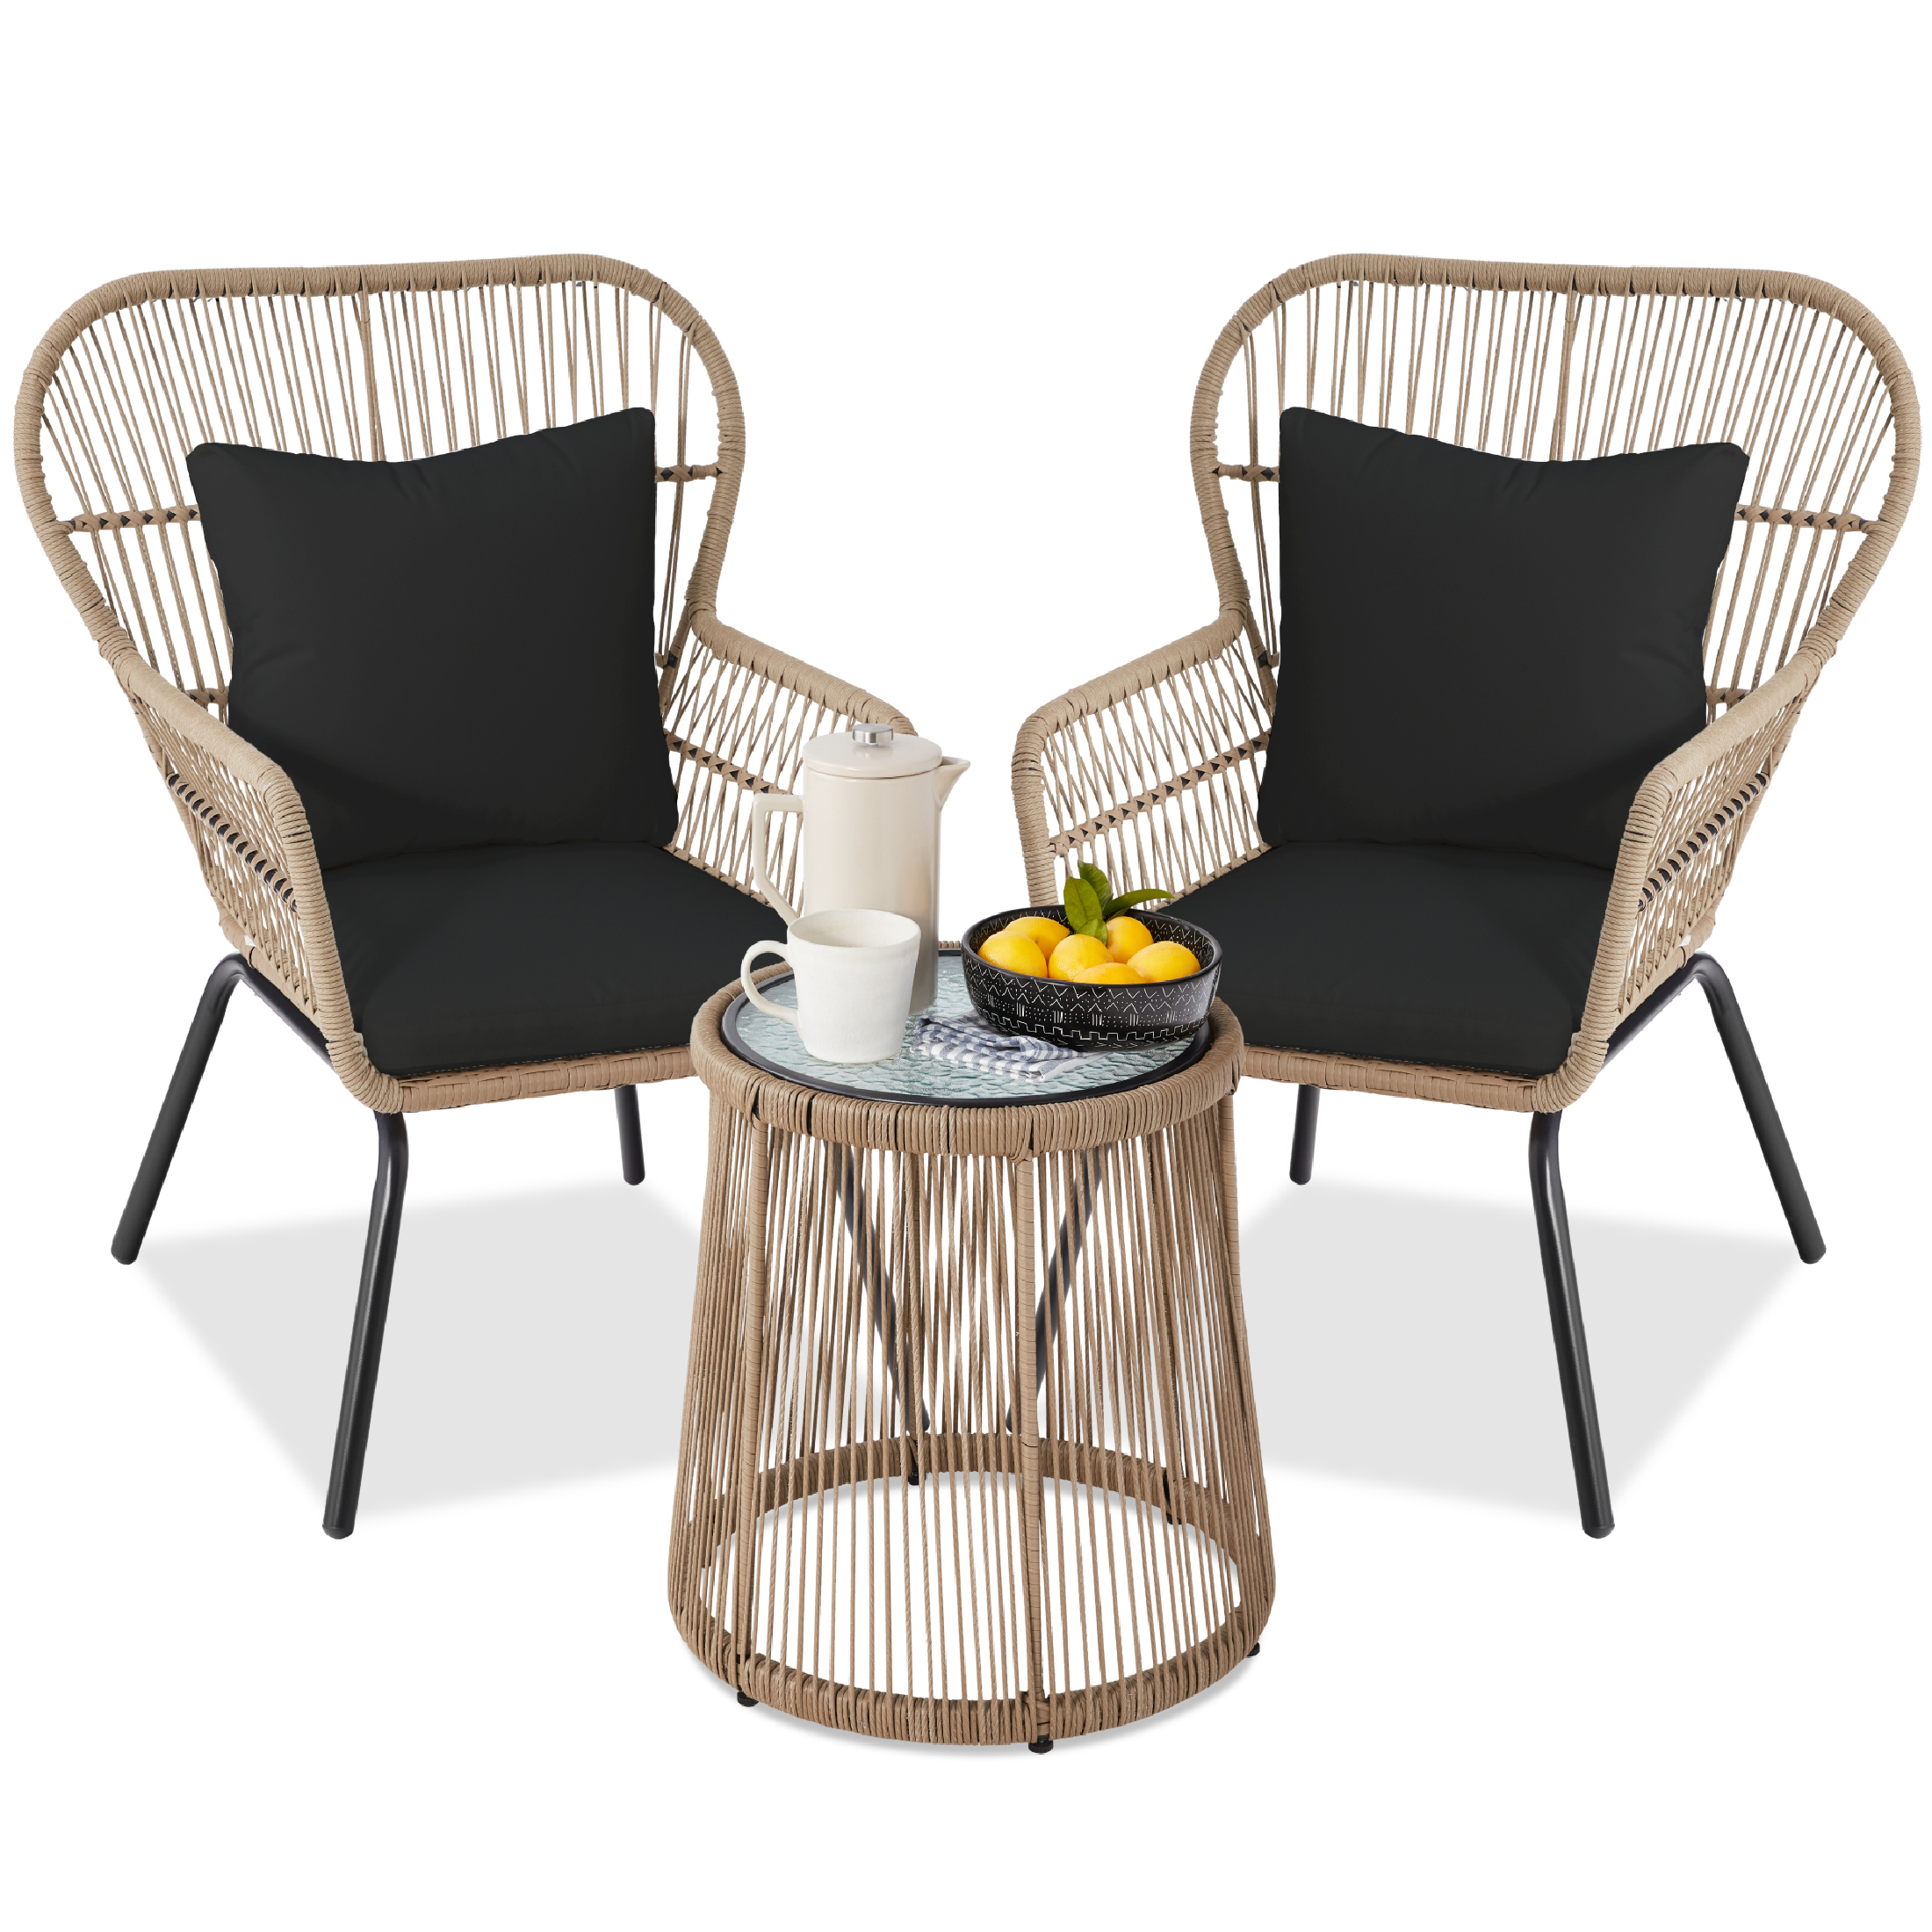 Best Choice Products 3-Piece Patio Conversation Bistro Set, Outdoor Wicker w/ 2 Chairs, Cushions, Table - Natural/Black - image 1 of 8